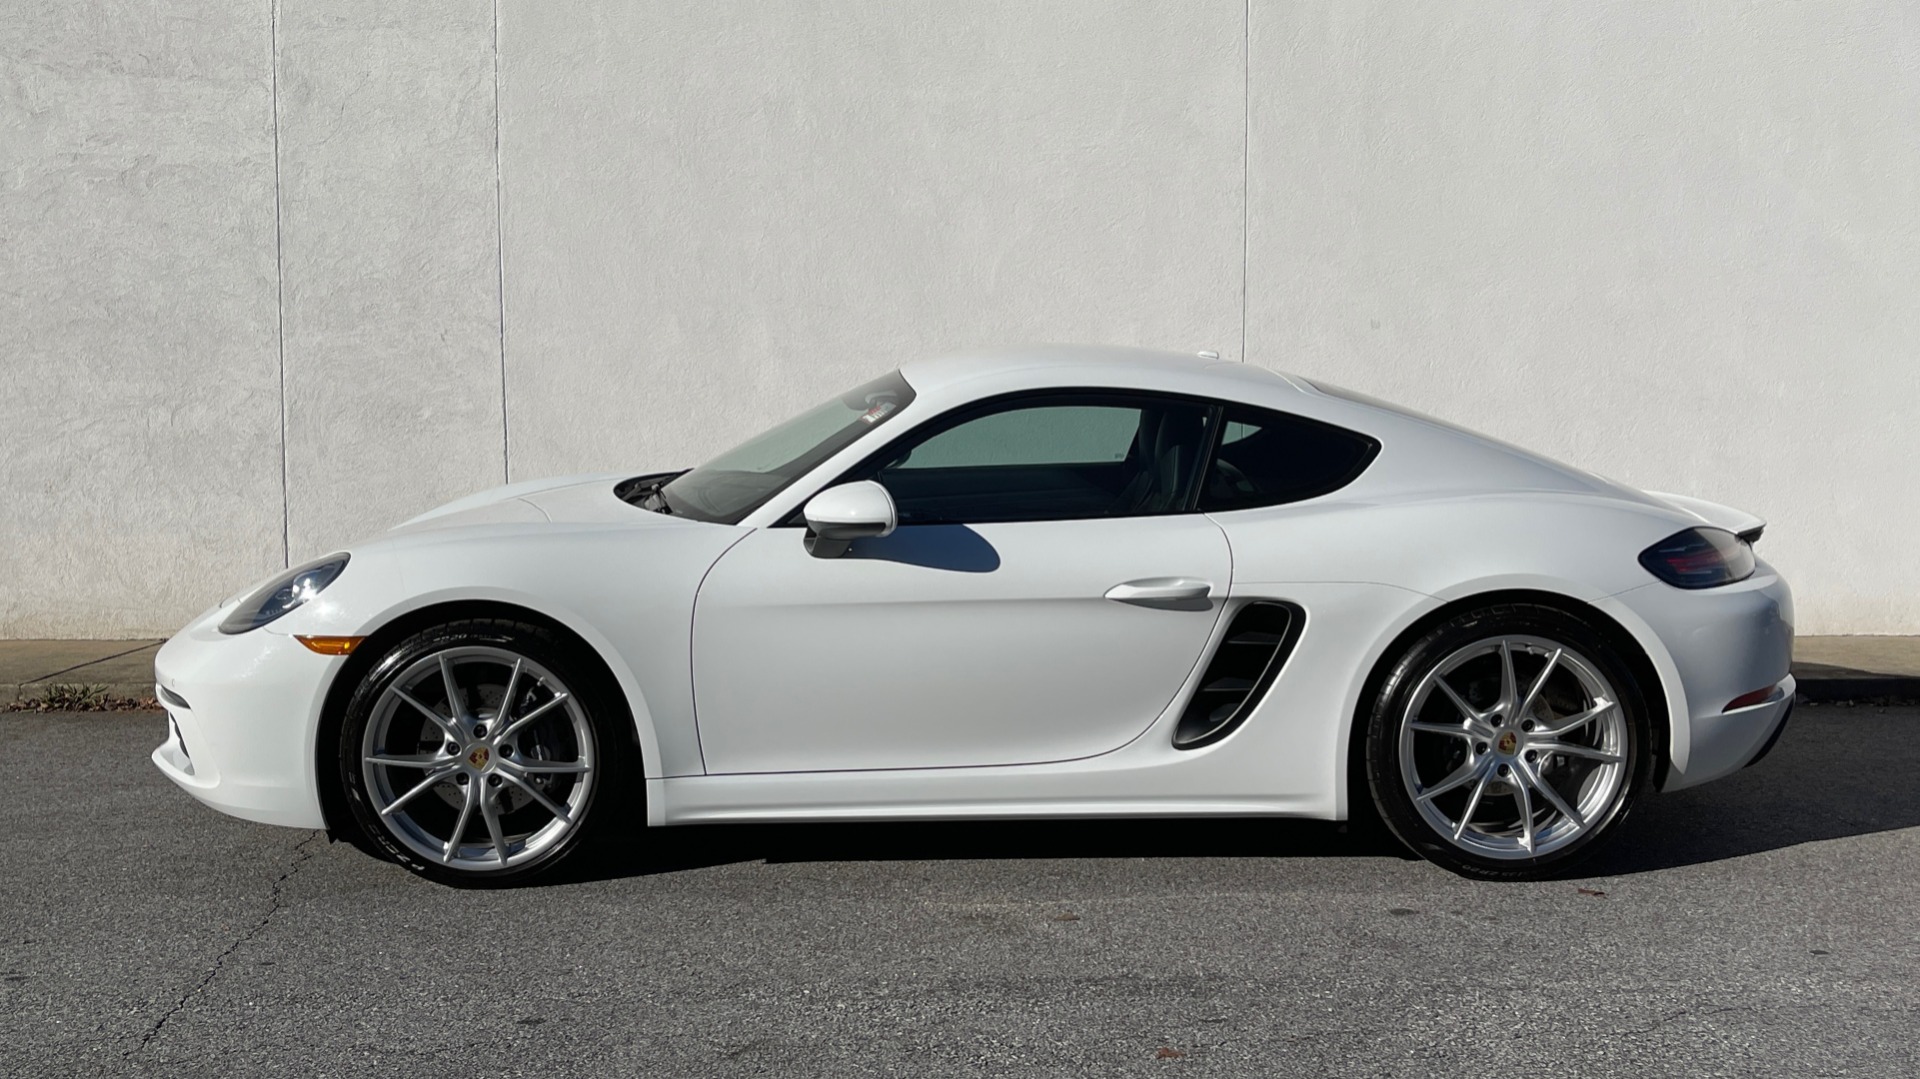 Used 2017 Porsche 718 CAYMAN COUPE / 2.0L TURBO / 6-SPD MANUAL / BOSE / 20-INCH WHEELS for sale $49,395 at Formula Imports in Charlotte NC 28227 3